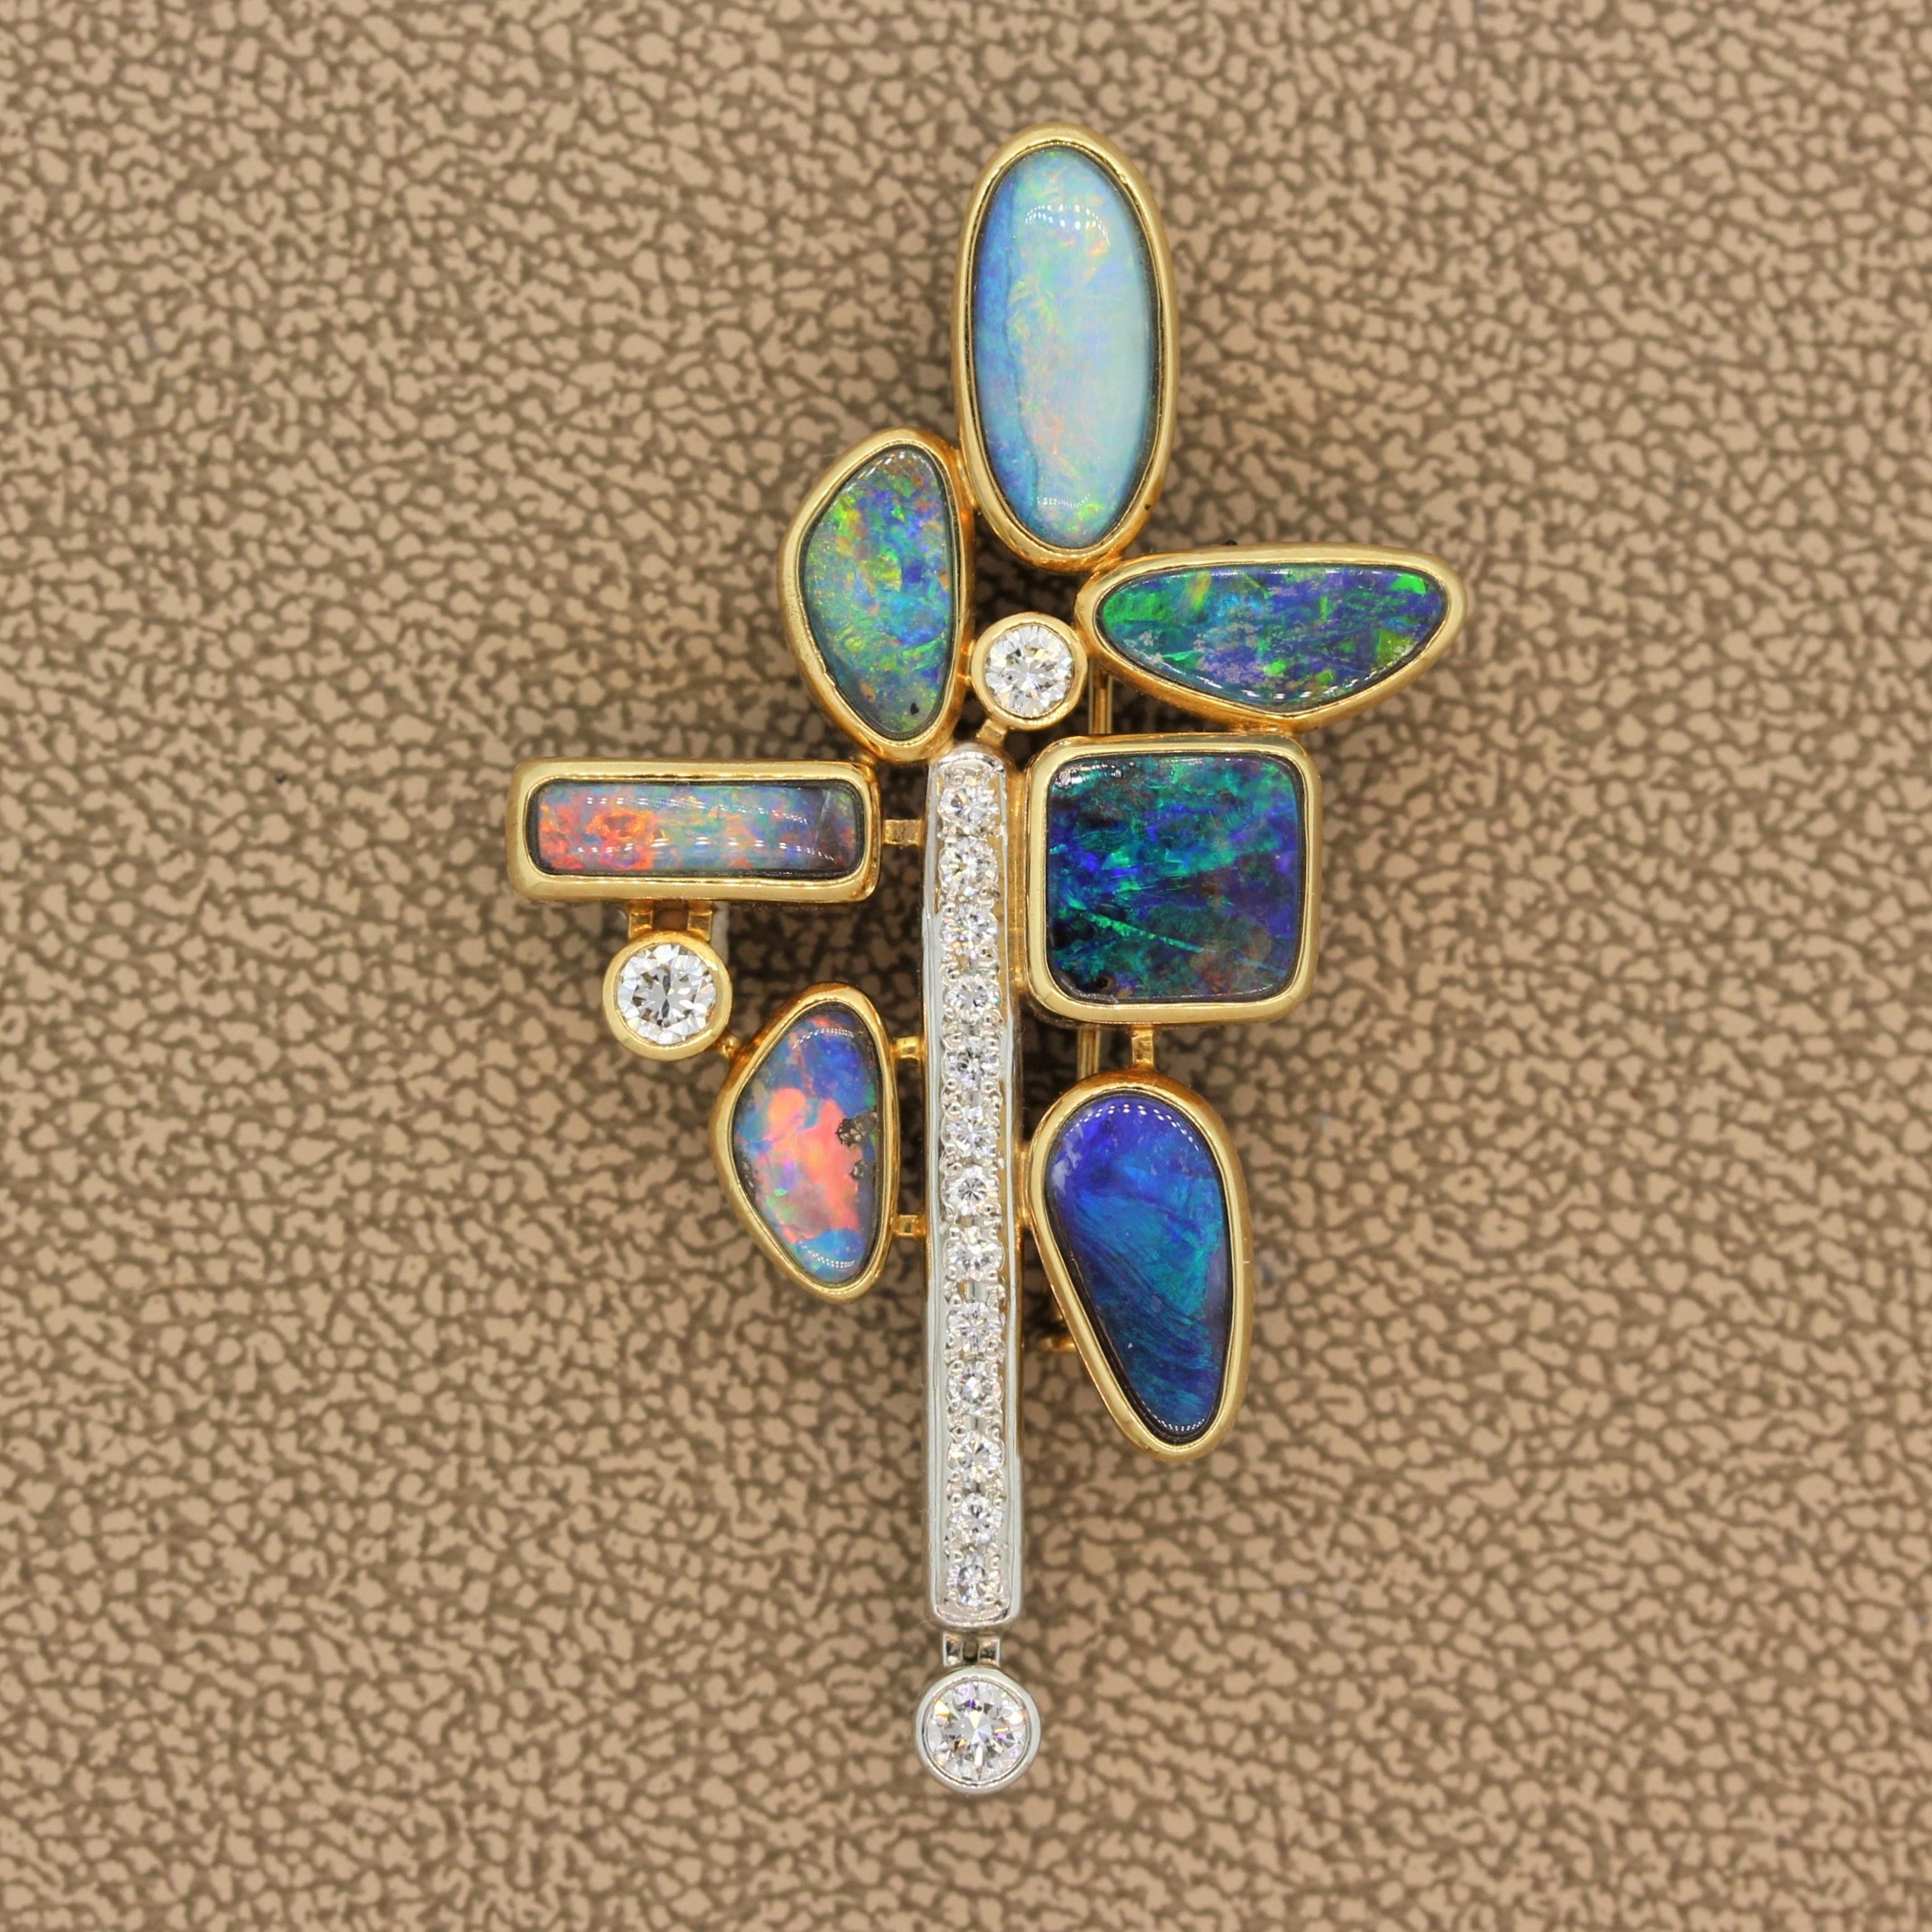 This one of a kind brooch features seven pieces of fine boulder opal in an 18K yellow gold setting. The bezel set opals all show amazing play of color with flashes of red green and blue. They are accented by colorless diamonds which are set in